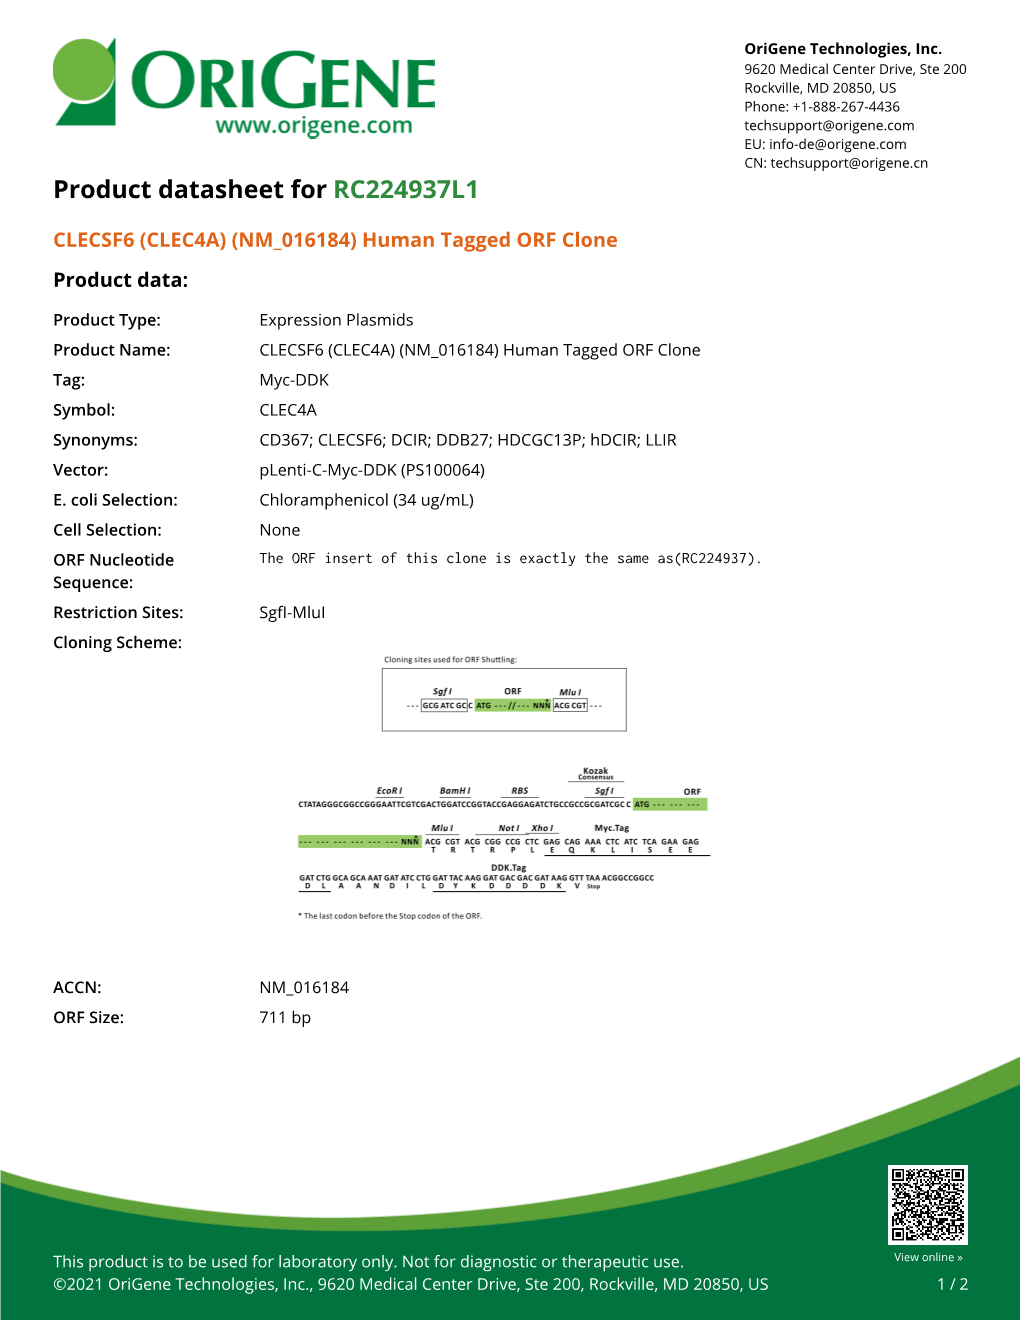 CLECSF6 (CLEC4A) (NM 016184) Human Tagged ORF Clone Product Data